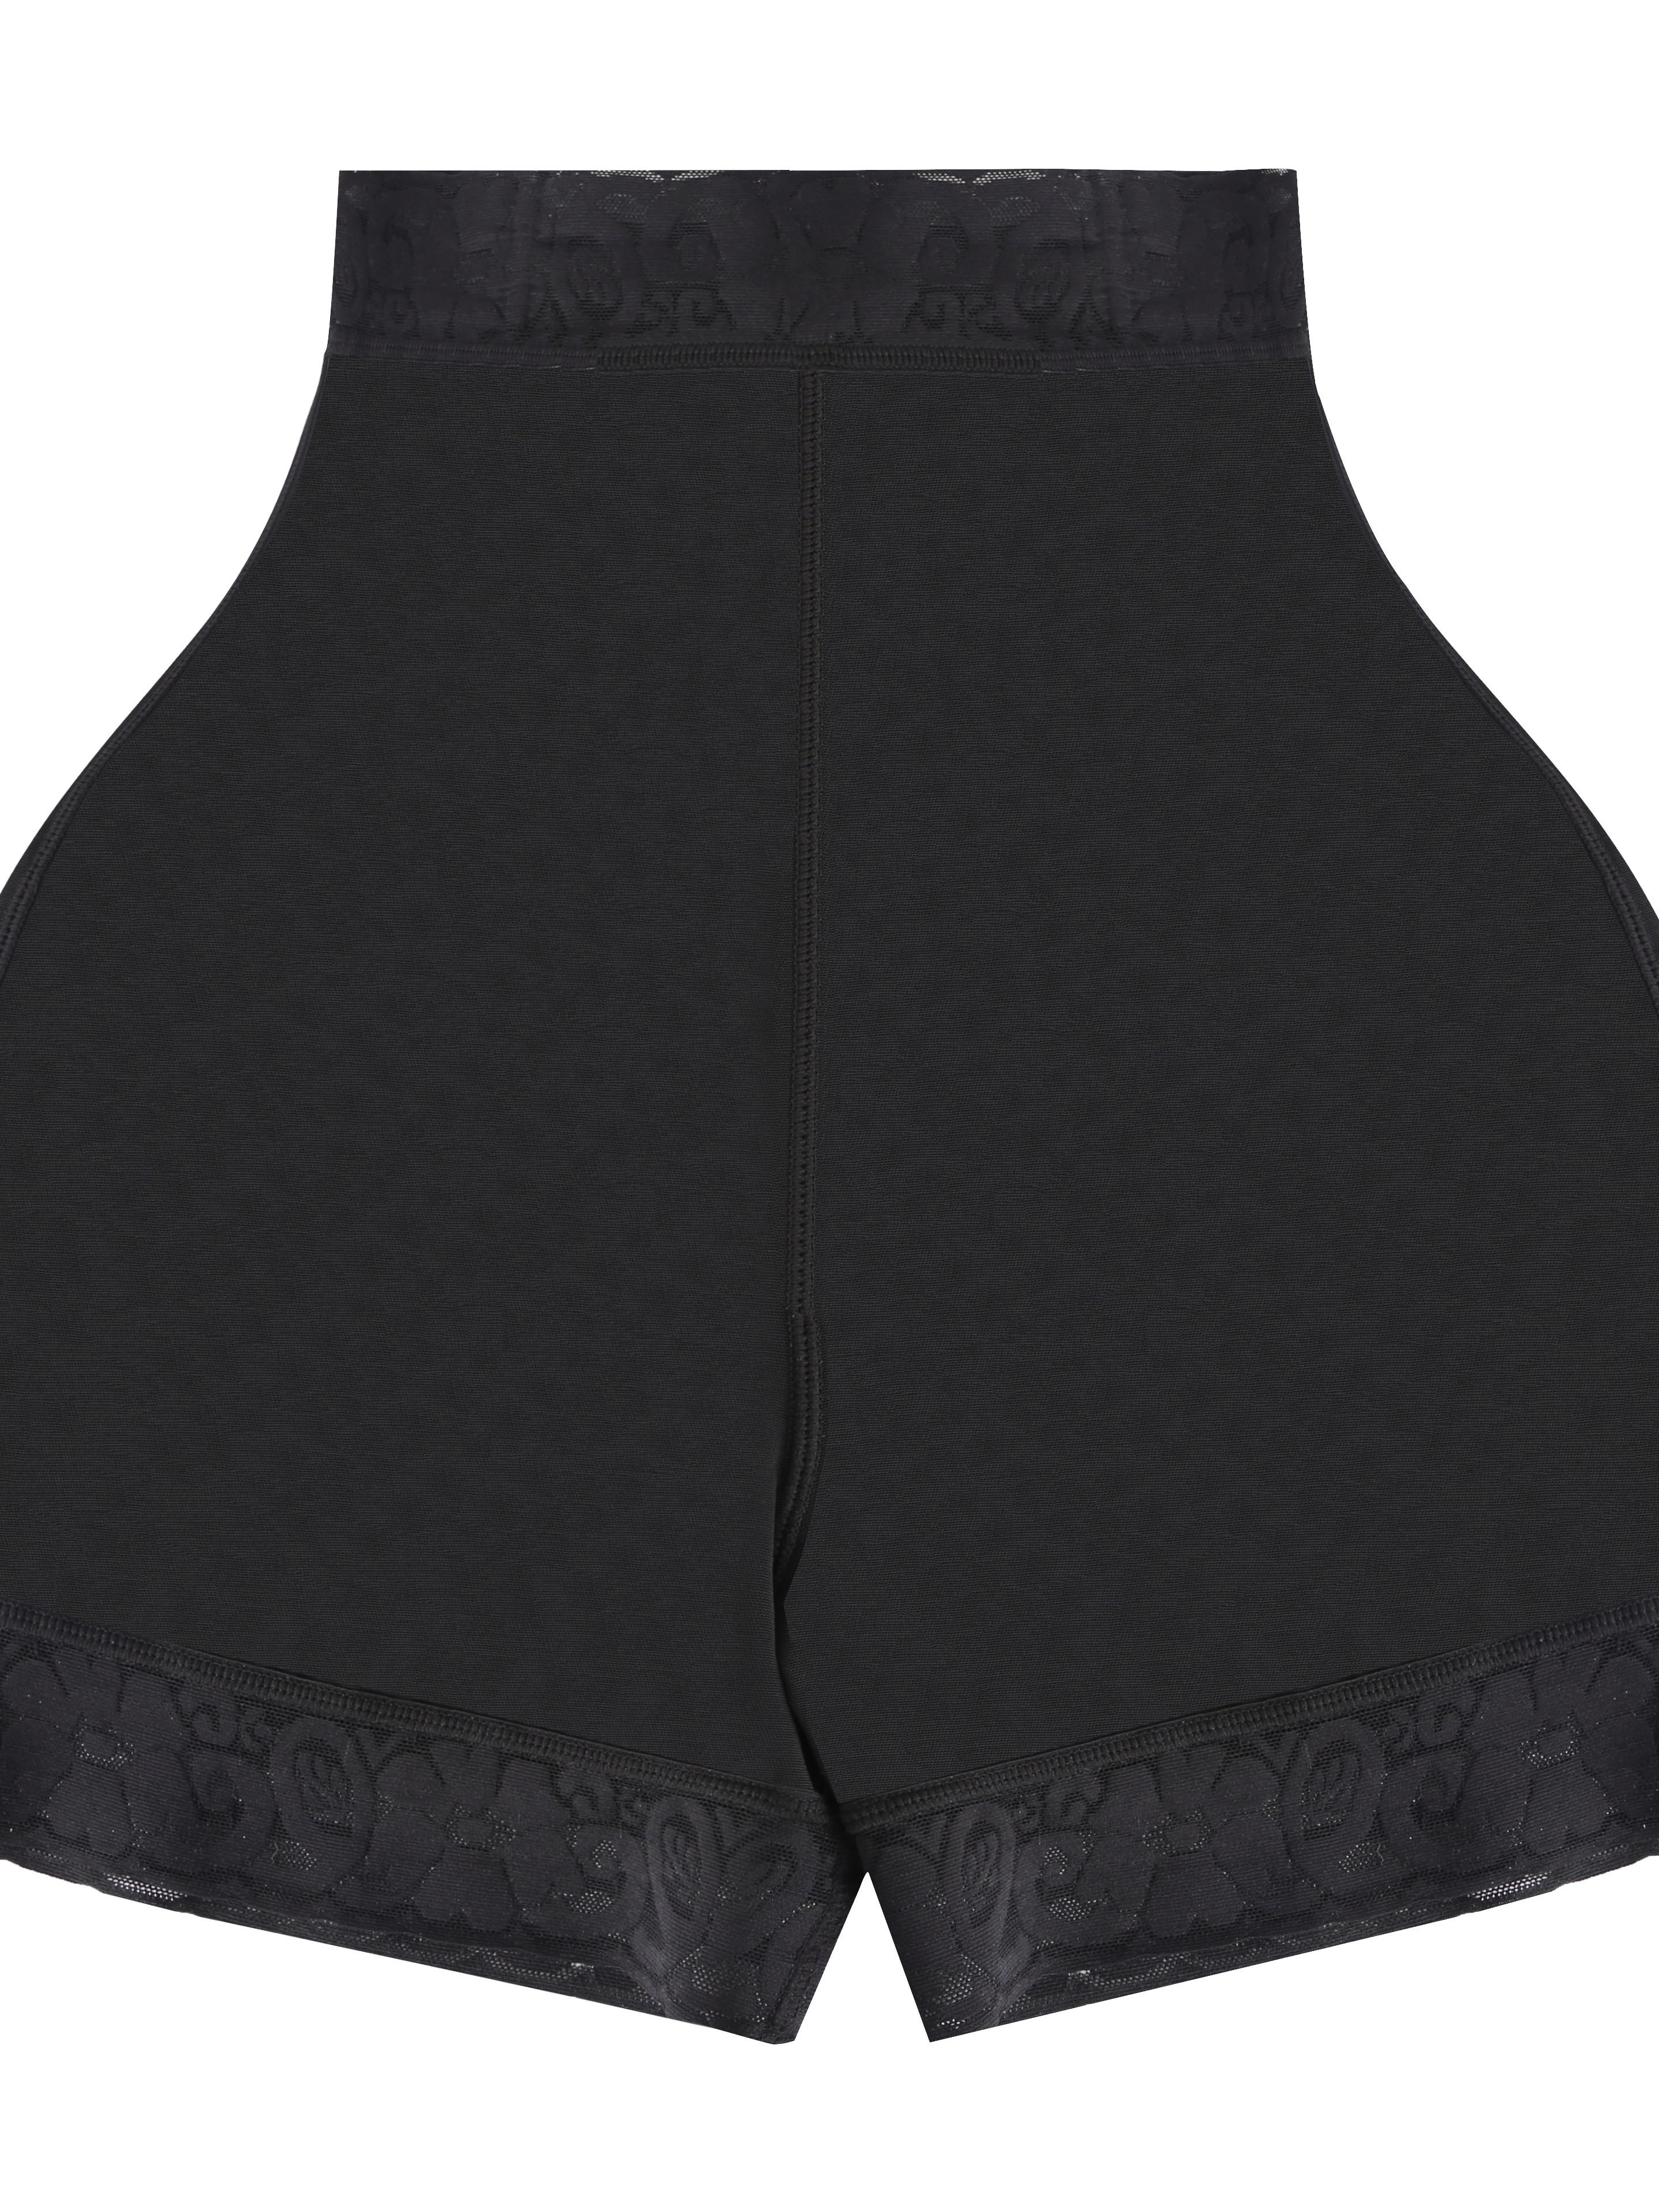 BIANCA HIGH WAISTED HOOK AND EYE OPEN FRONT CLOSURE SHAPEWEAR CONTROL SHORTS  - BLACK